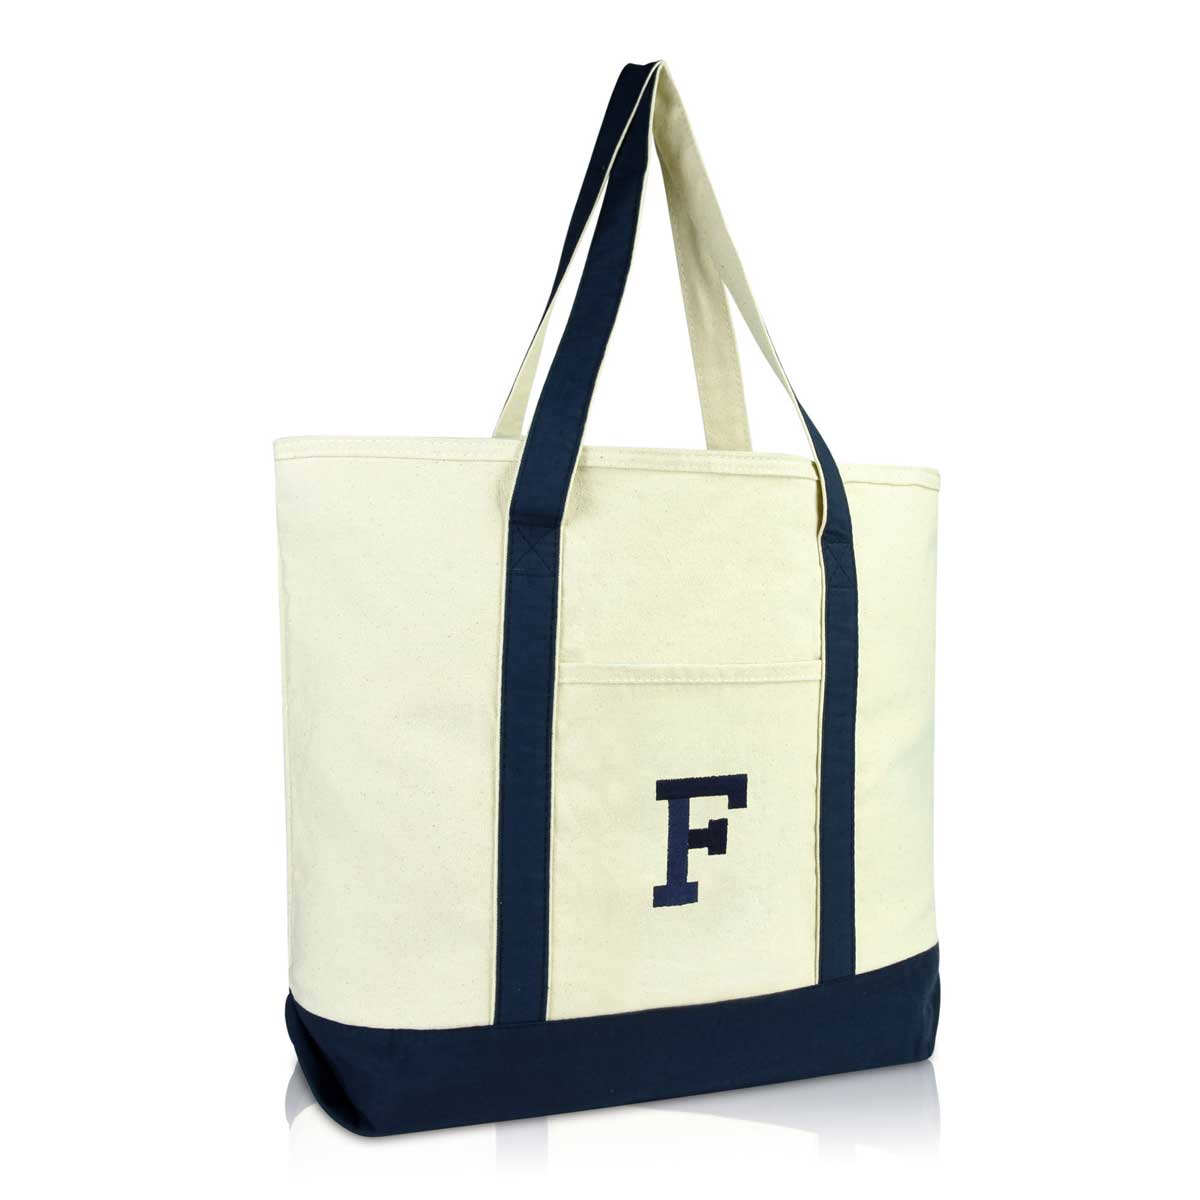 Dalix Initial Tote Bag Personalized Monogram Zippered Top Letter - F